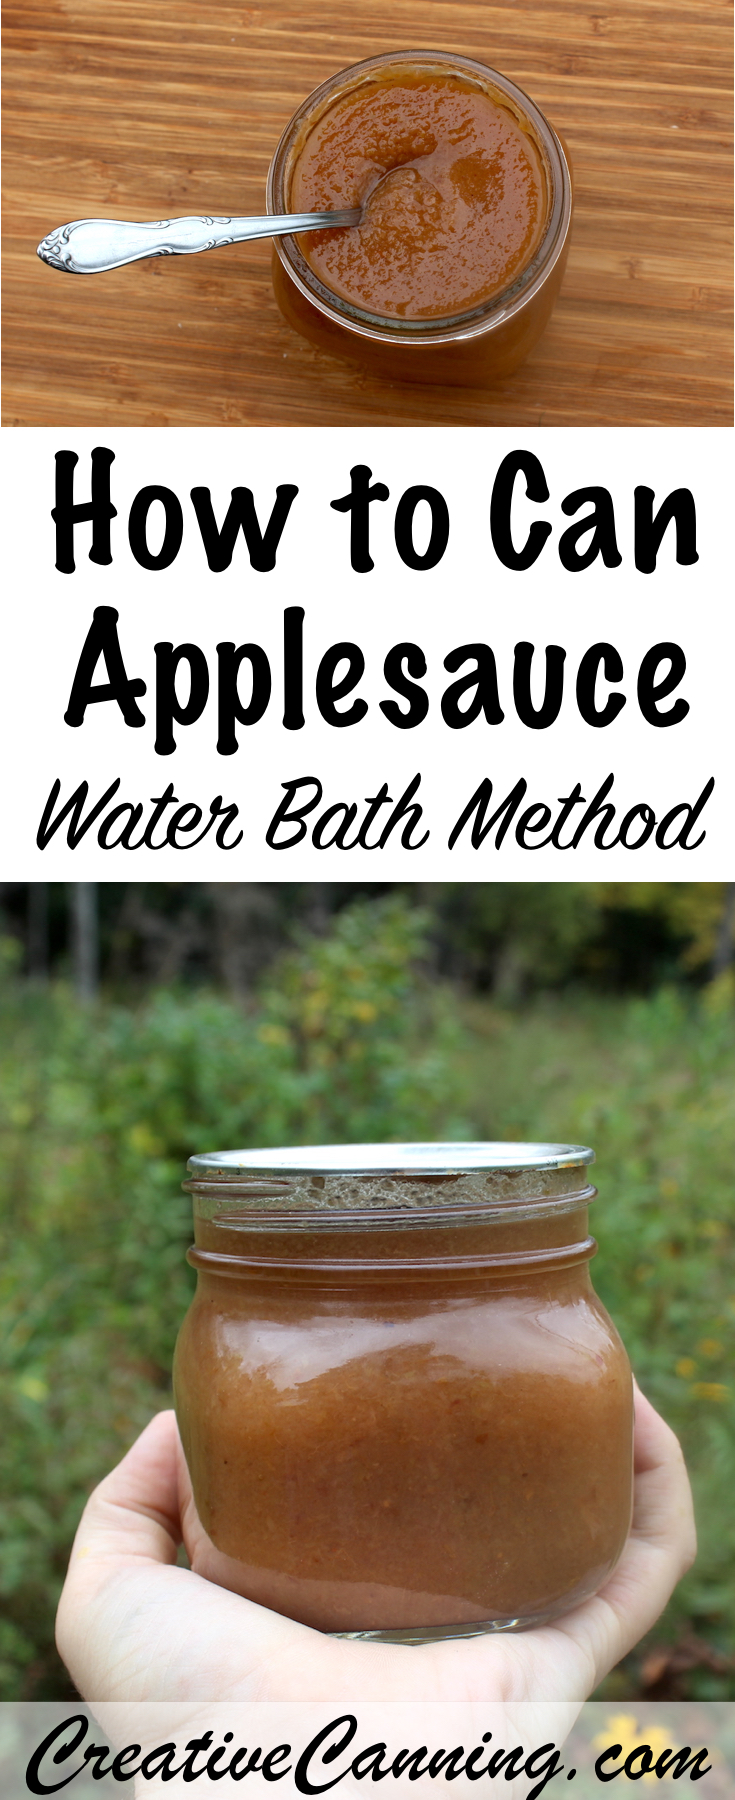 How to Can Applesauce